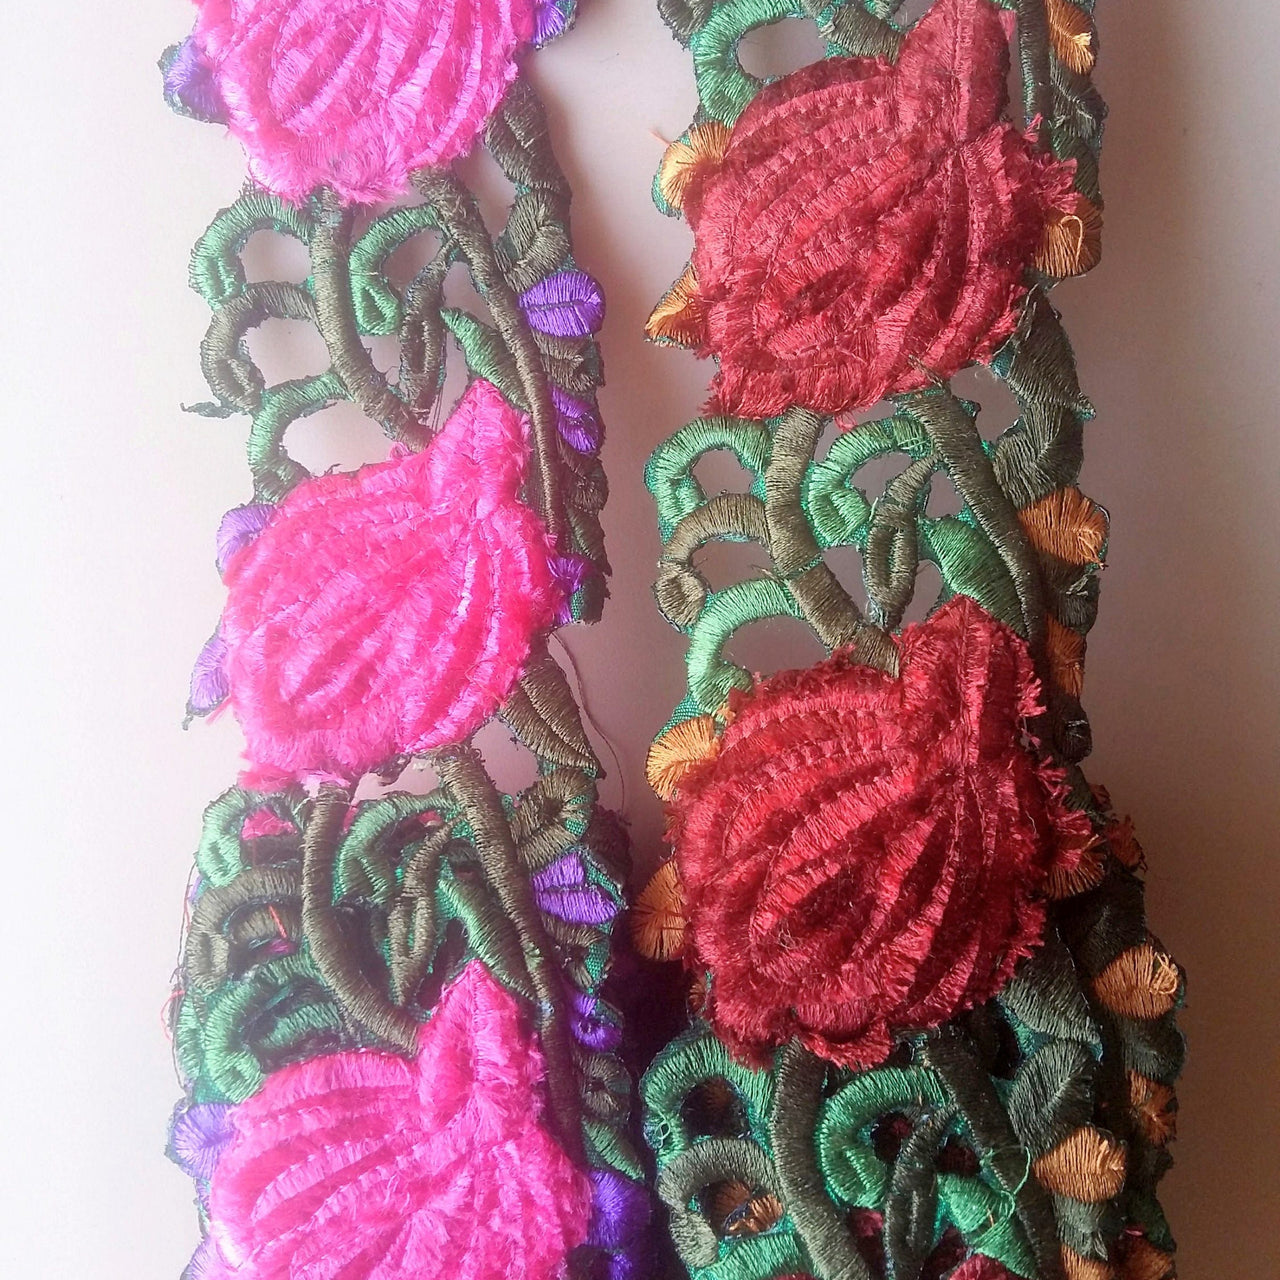 Fabric Cut Work Trim With Fuchsia Pink, Purple And Green Floral Embroidery, 72mm wide - 200317L267